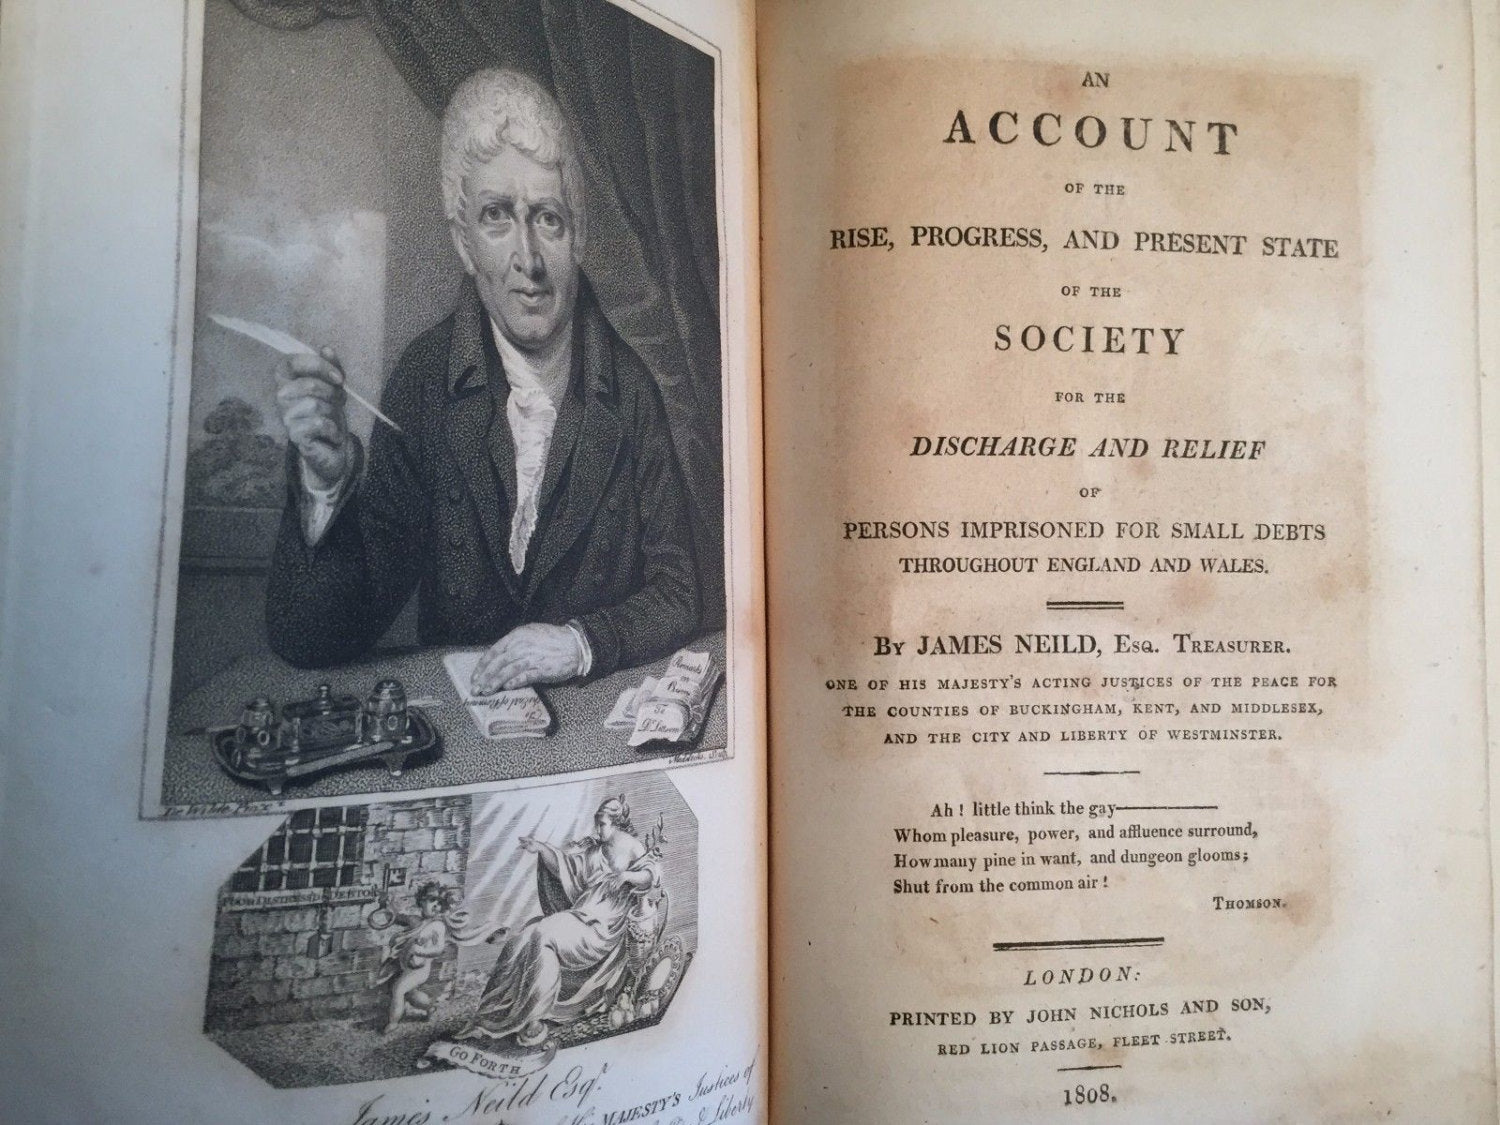 Book Regarding Persons Imprisoned for Small Debts in England and Wales, James Neild, 1808, Rare